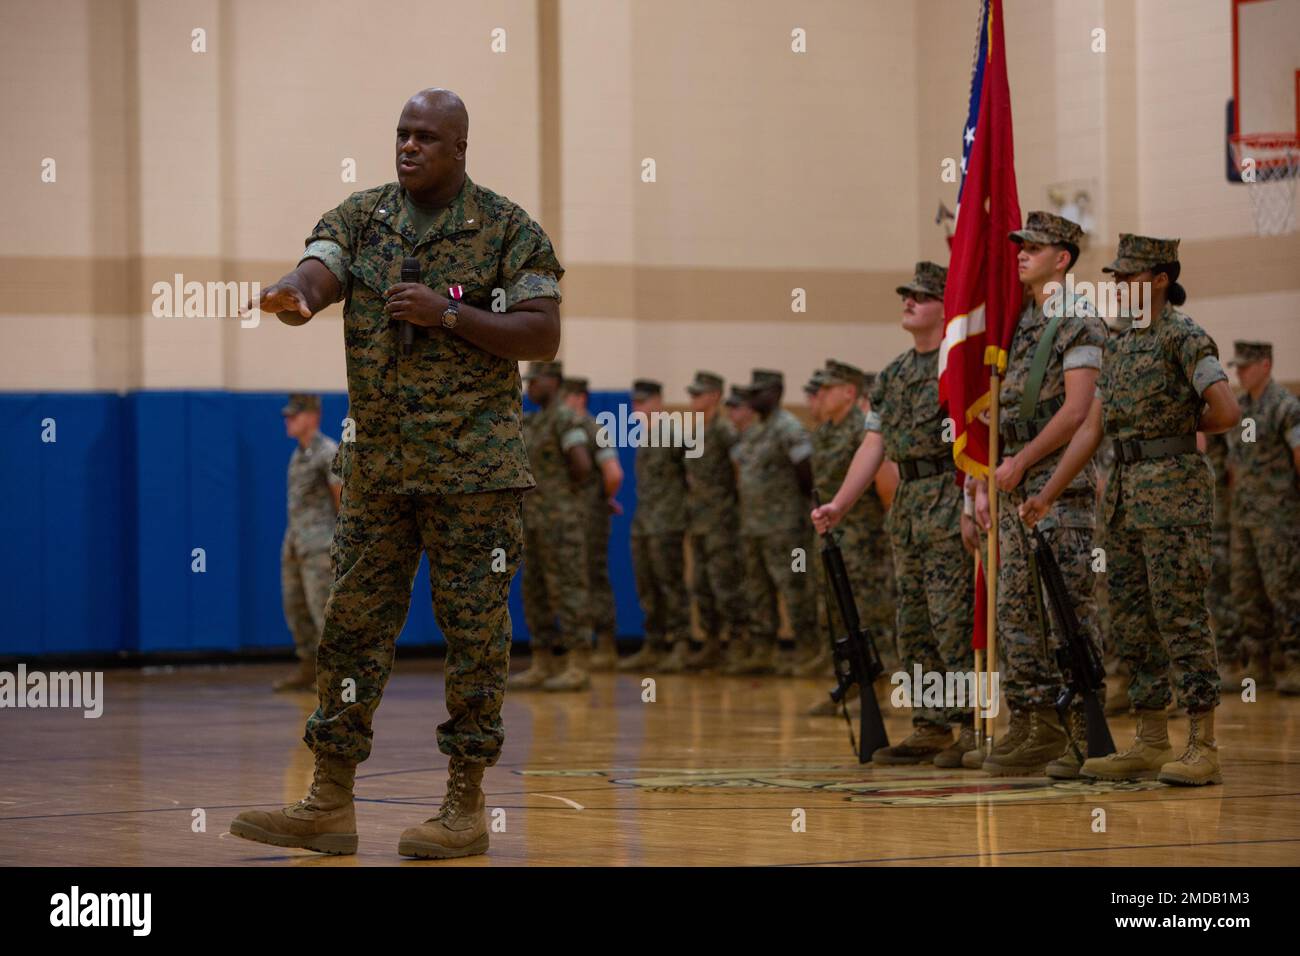 U.S. Marine Corps Lt. Col. Leron E. Lane, the outgoing commanding officer  of Headquarters and Support (H&S) Battalion, School of Infantry East  (SOI-East) addresses attendees during the H&S Battalion change of command